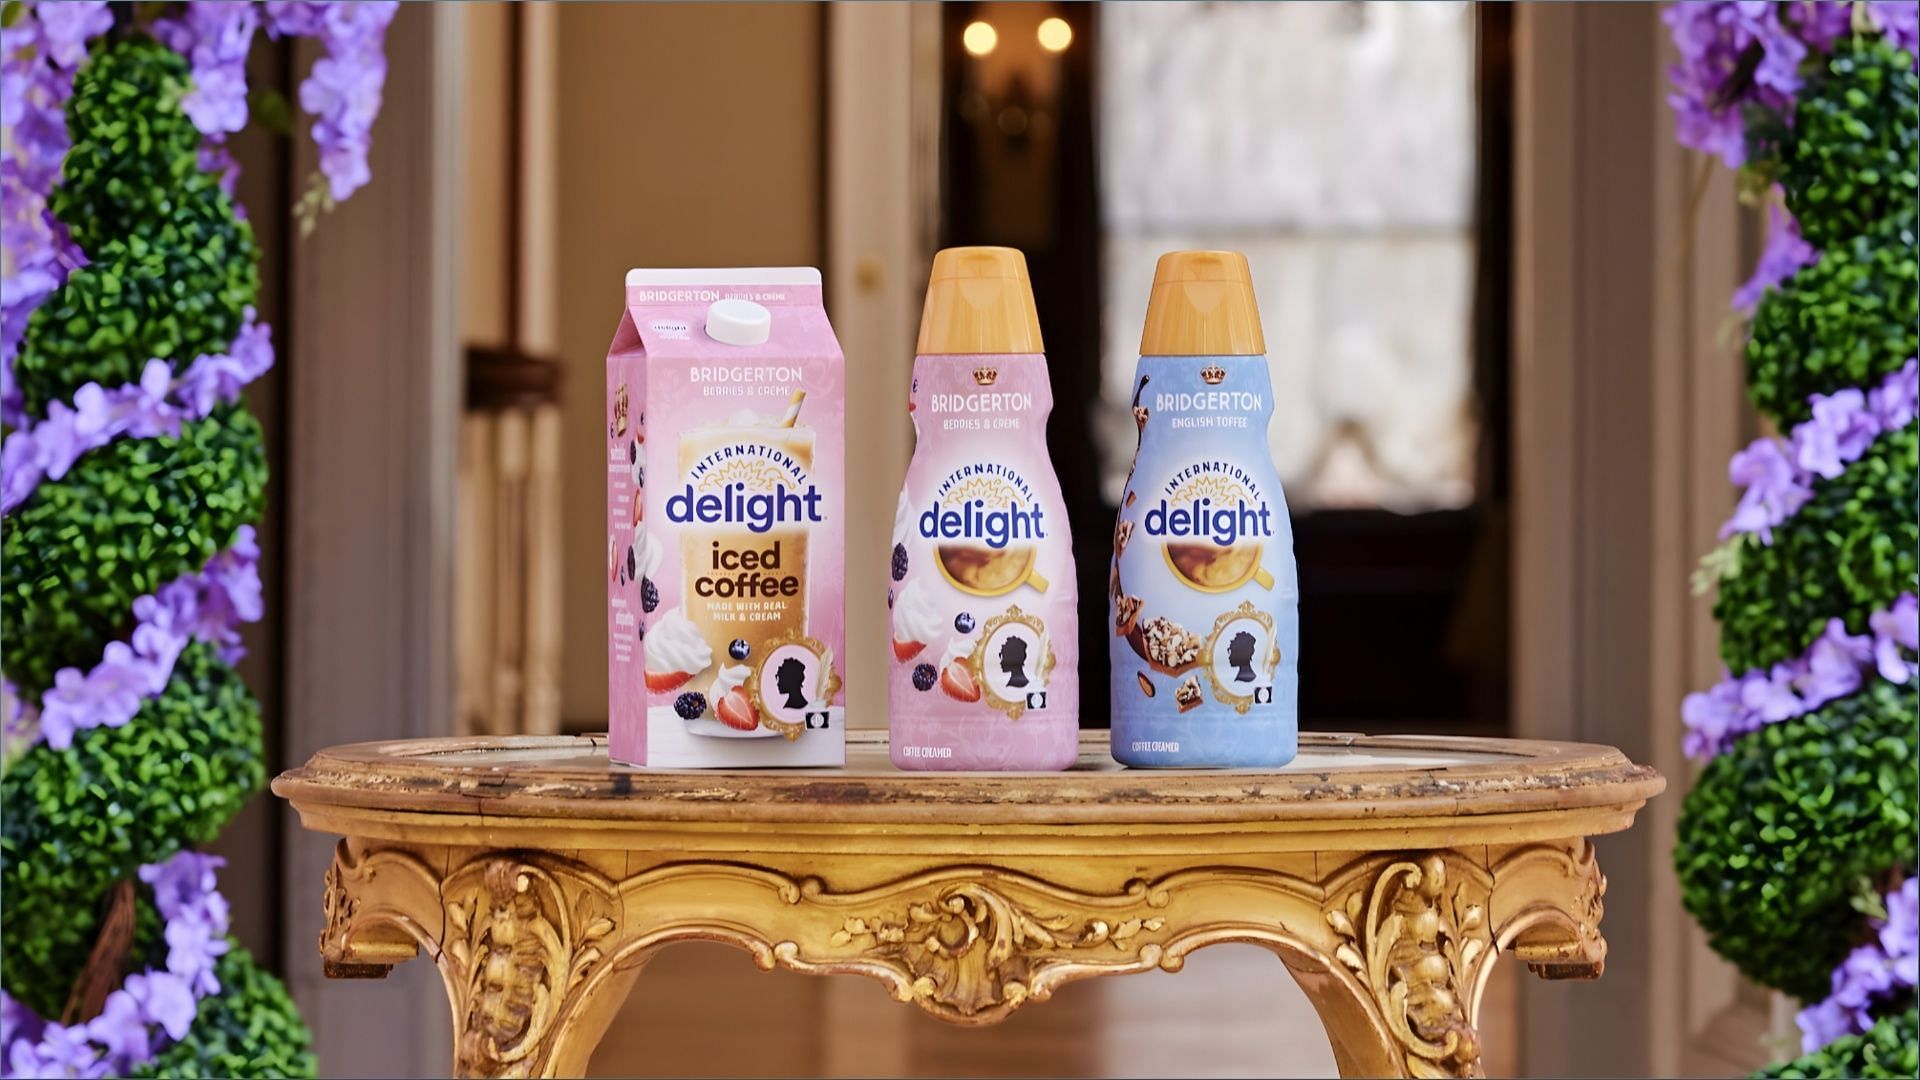 International Delight introduces new coffee and creamers (Image via International Delight)